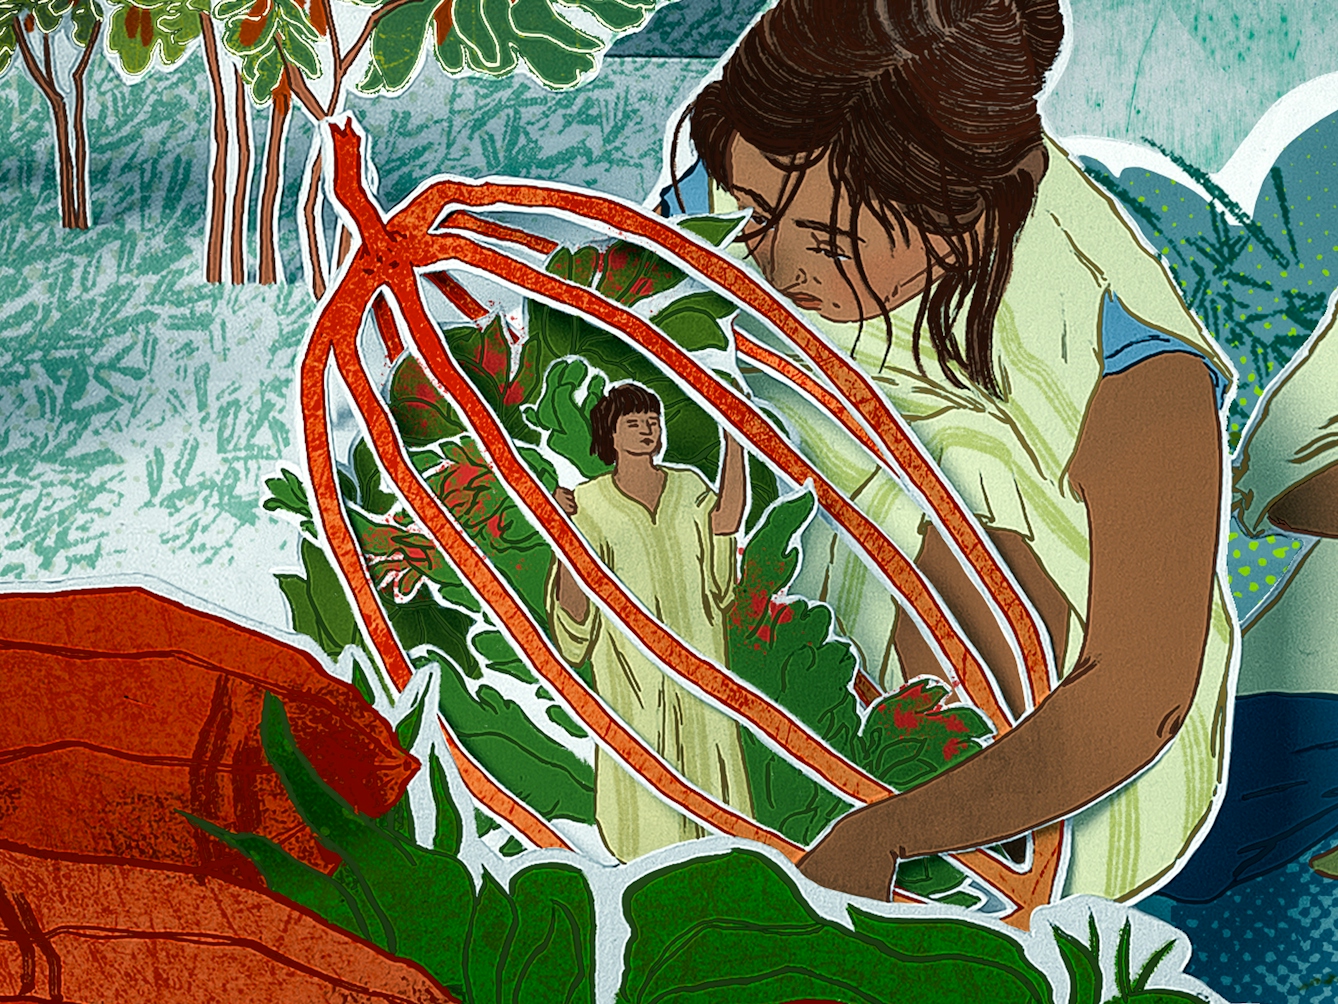 Photograph of a papercut 3D artwork. Detail from a larger artwork, showing two brunette children, possibly siblings, dressed in simple white and blue clothing and are crouching down amongst different coloured shrubs, plants and trees. The girl, who appears older than the boy, is holding an abstract, cocoa bean-shaped hollow red structure. Inside it is a miniature brunette male wearing yellow robes, and some red and green shrubbery. He is looking upwards towards the girl with his hand outstretched. The younger boy, holding some harvested red and green plant, watches from in wonderment. 